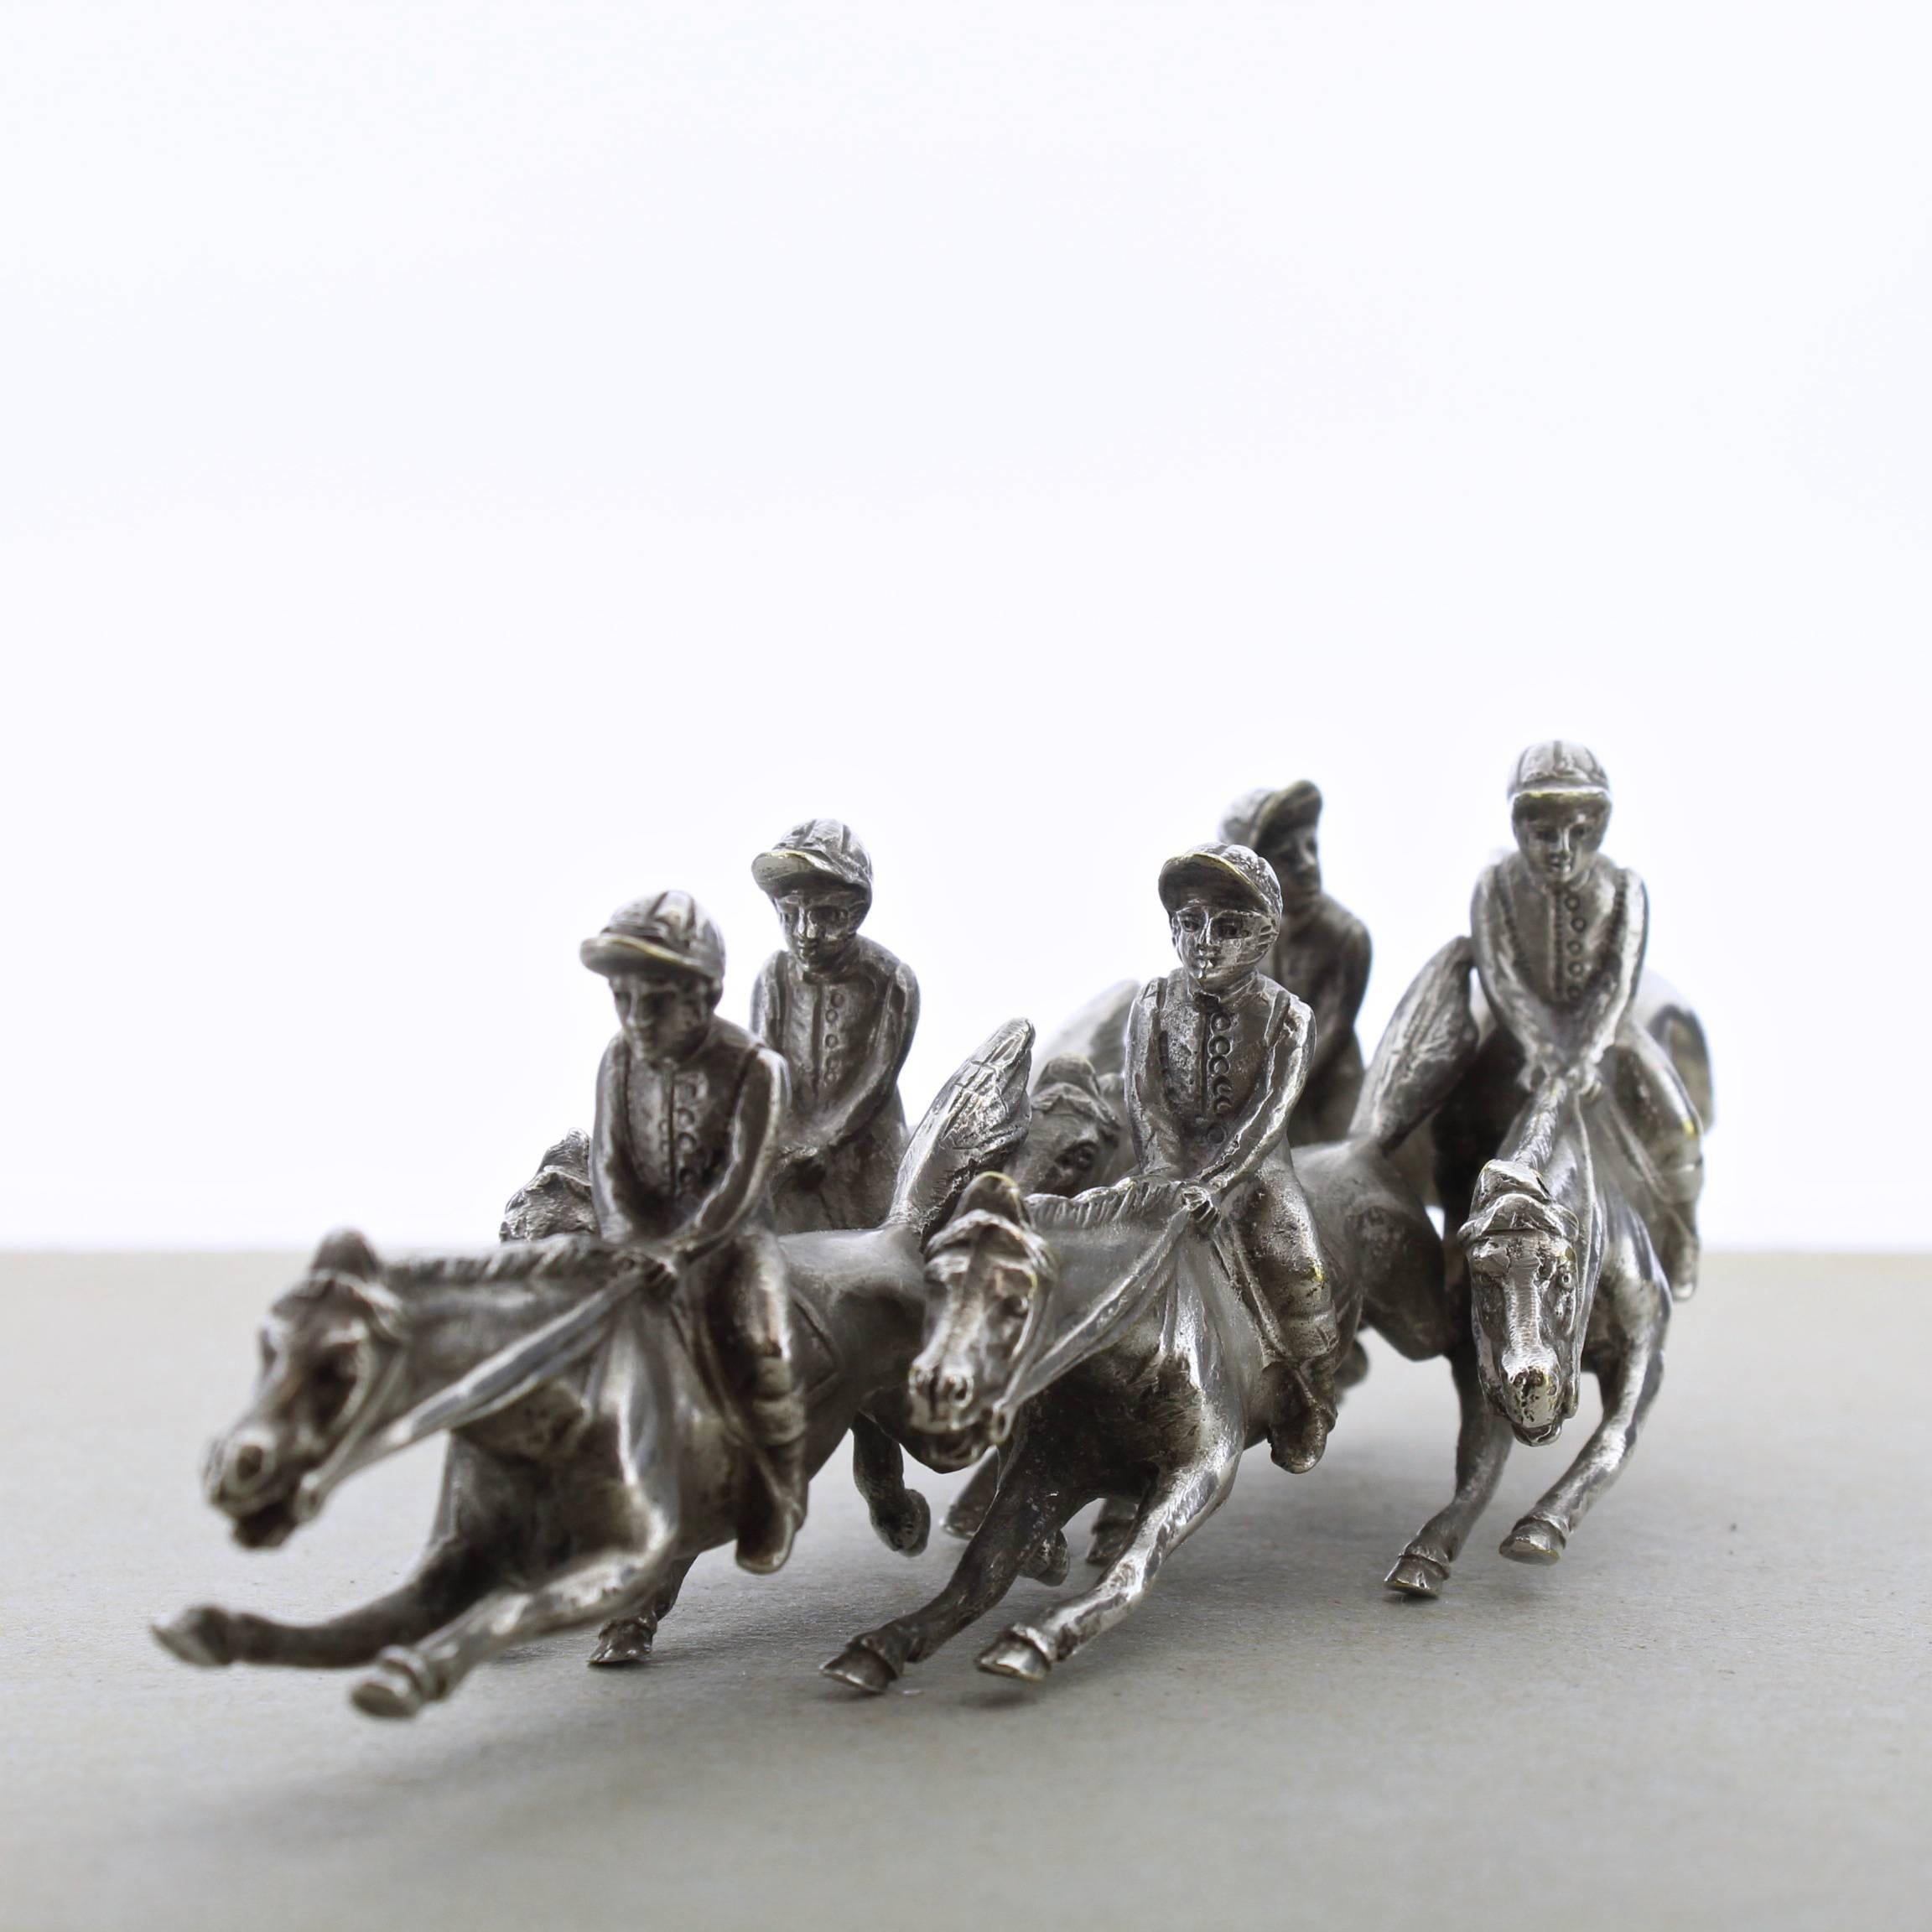 A terrific, vintage silverplate miniature figural group of horses and jockeys in full throated gallop. 

A paperweight-sized sculpture with wonderful modeling and detail throughout. 

Length: ca. 6 in.

Items purchased from David Sterner